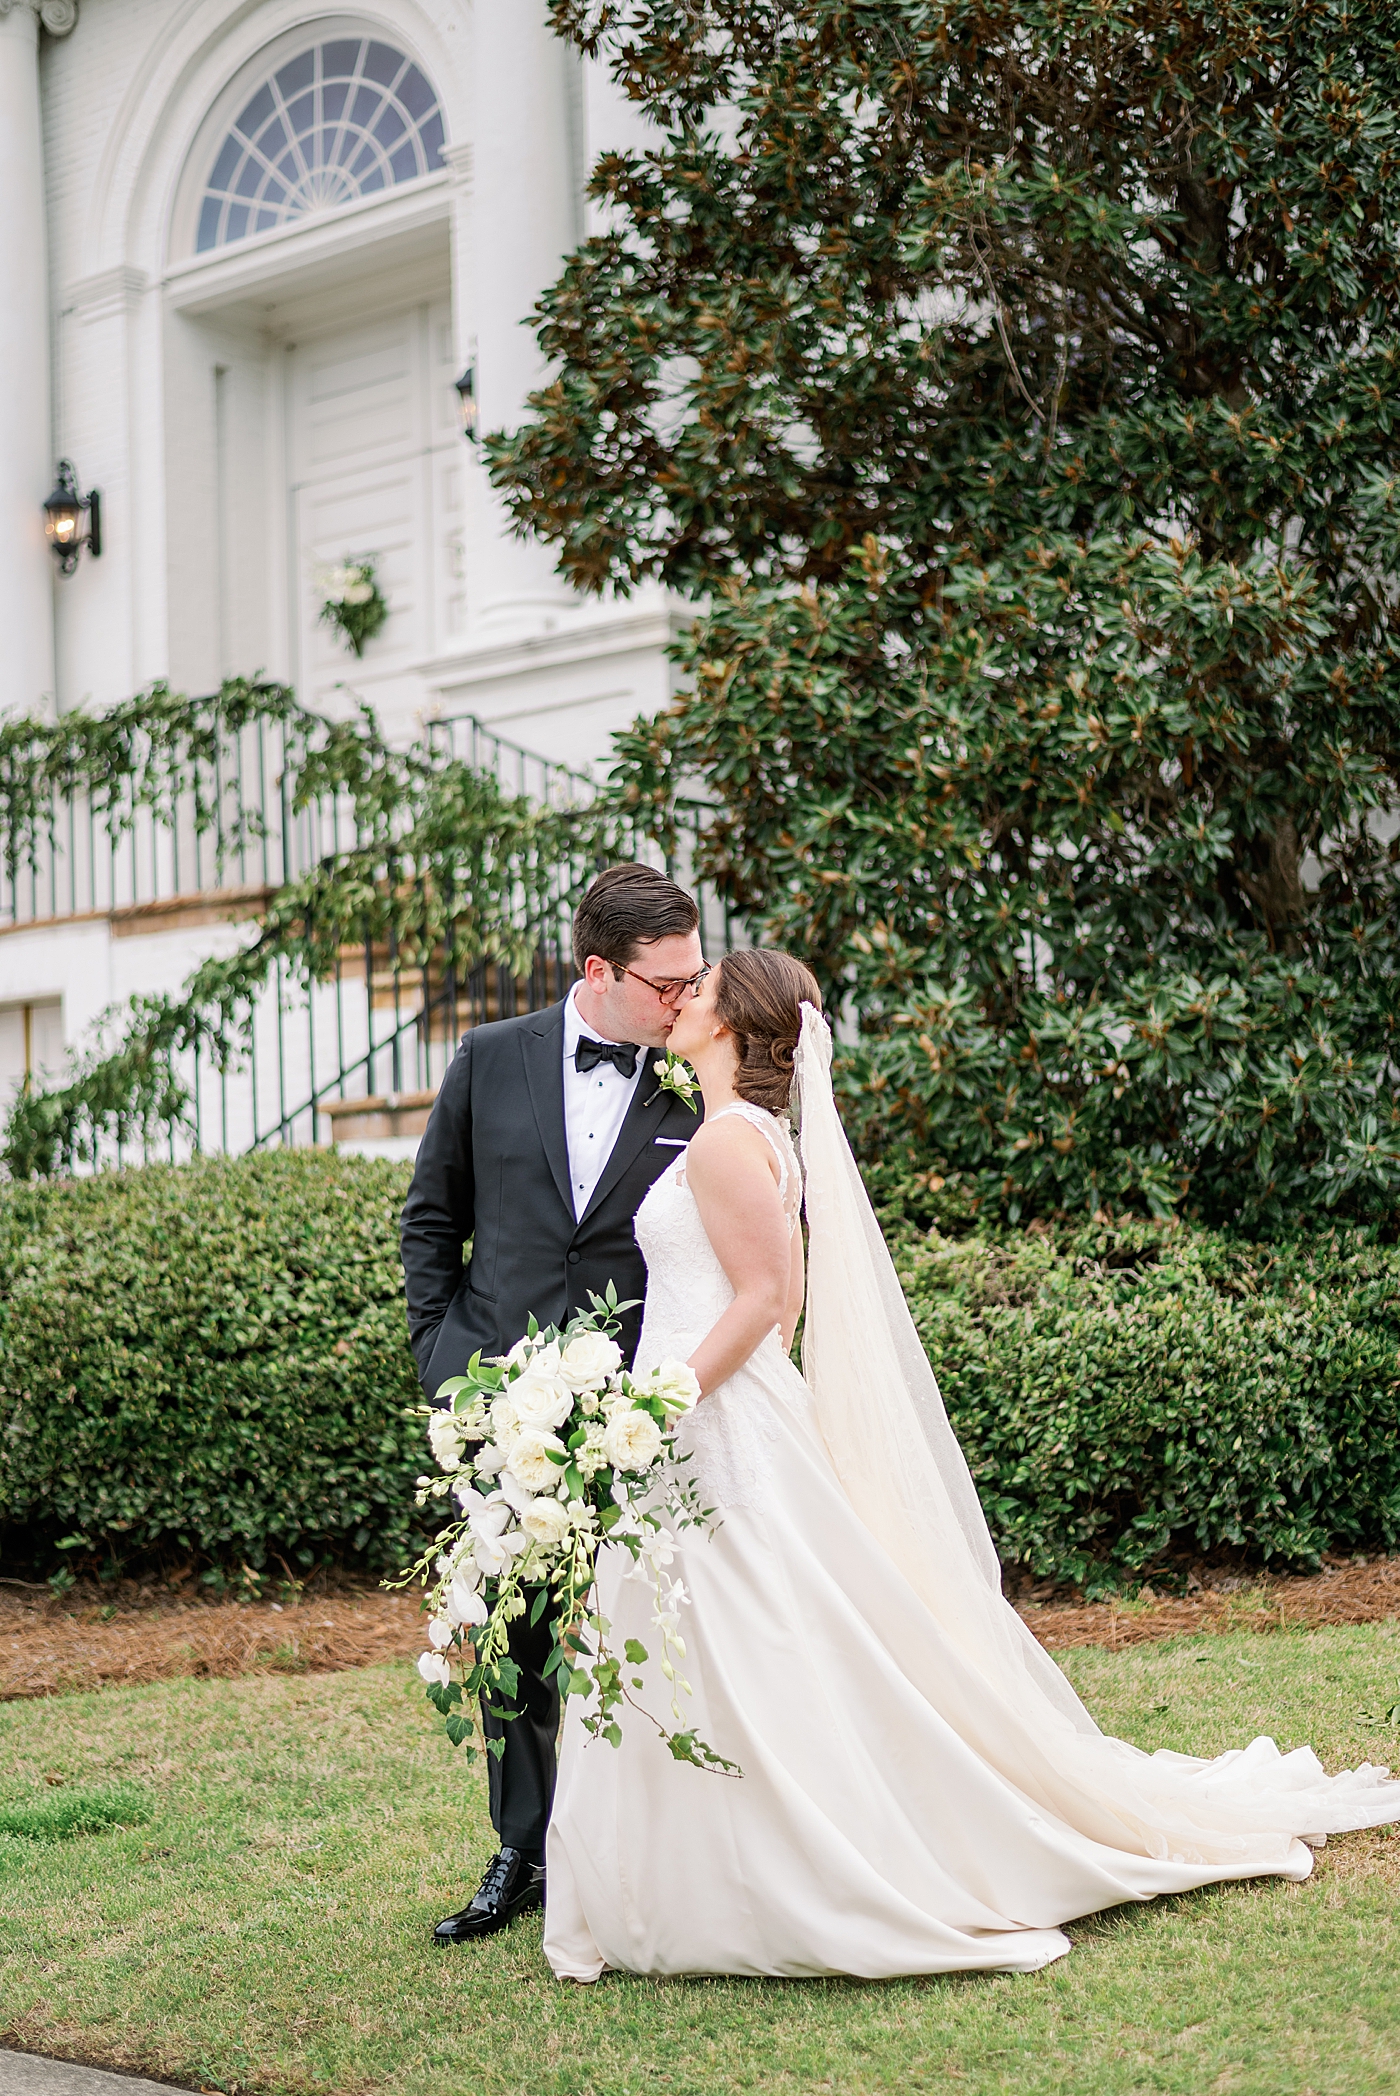 Bride and groom kissing walking near a church | Photo by Annie Laura Photography